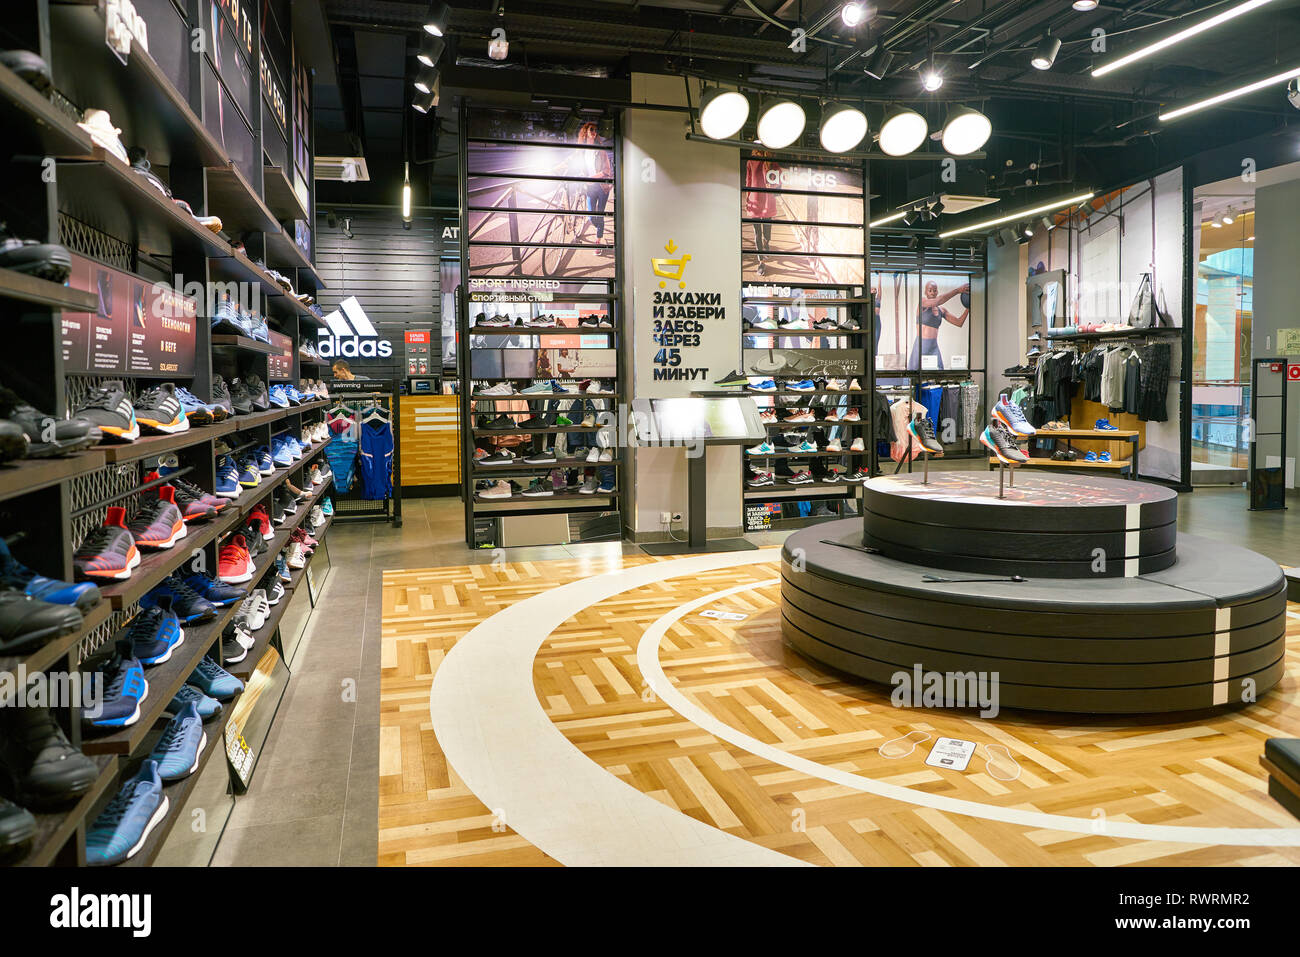 MOSCOW, RUSSIA - CIRCA SEPTEMBER, 2018: interior shot of Adidas store in Moscow. Stock Photo